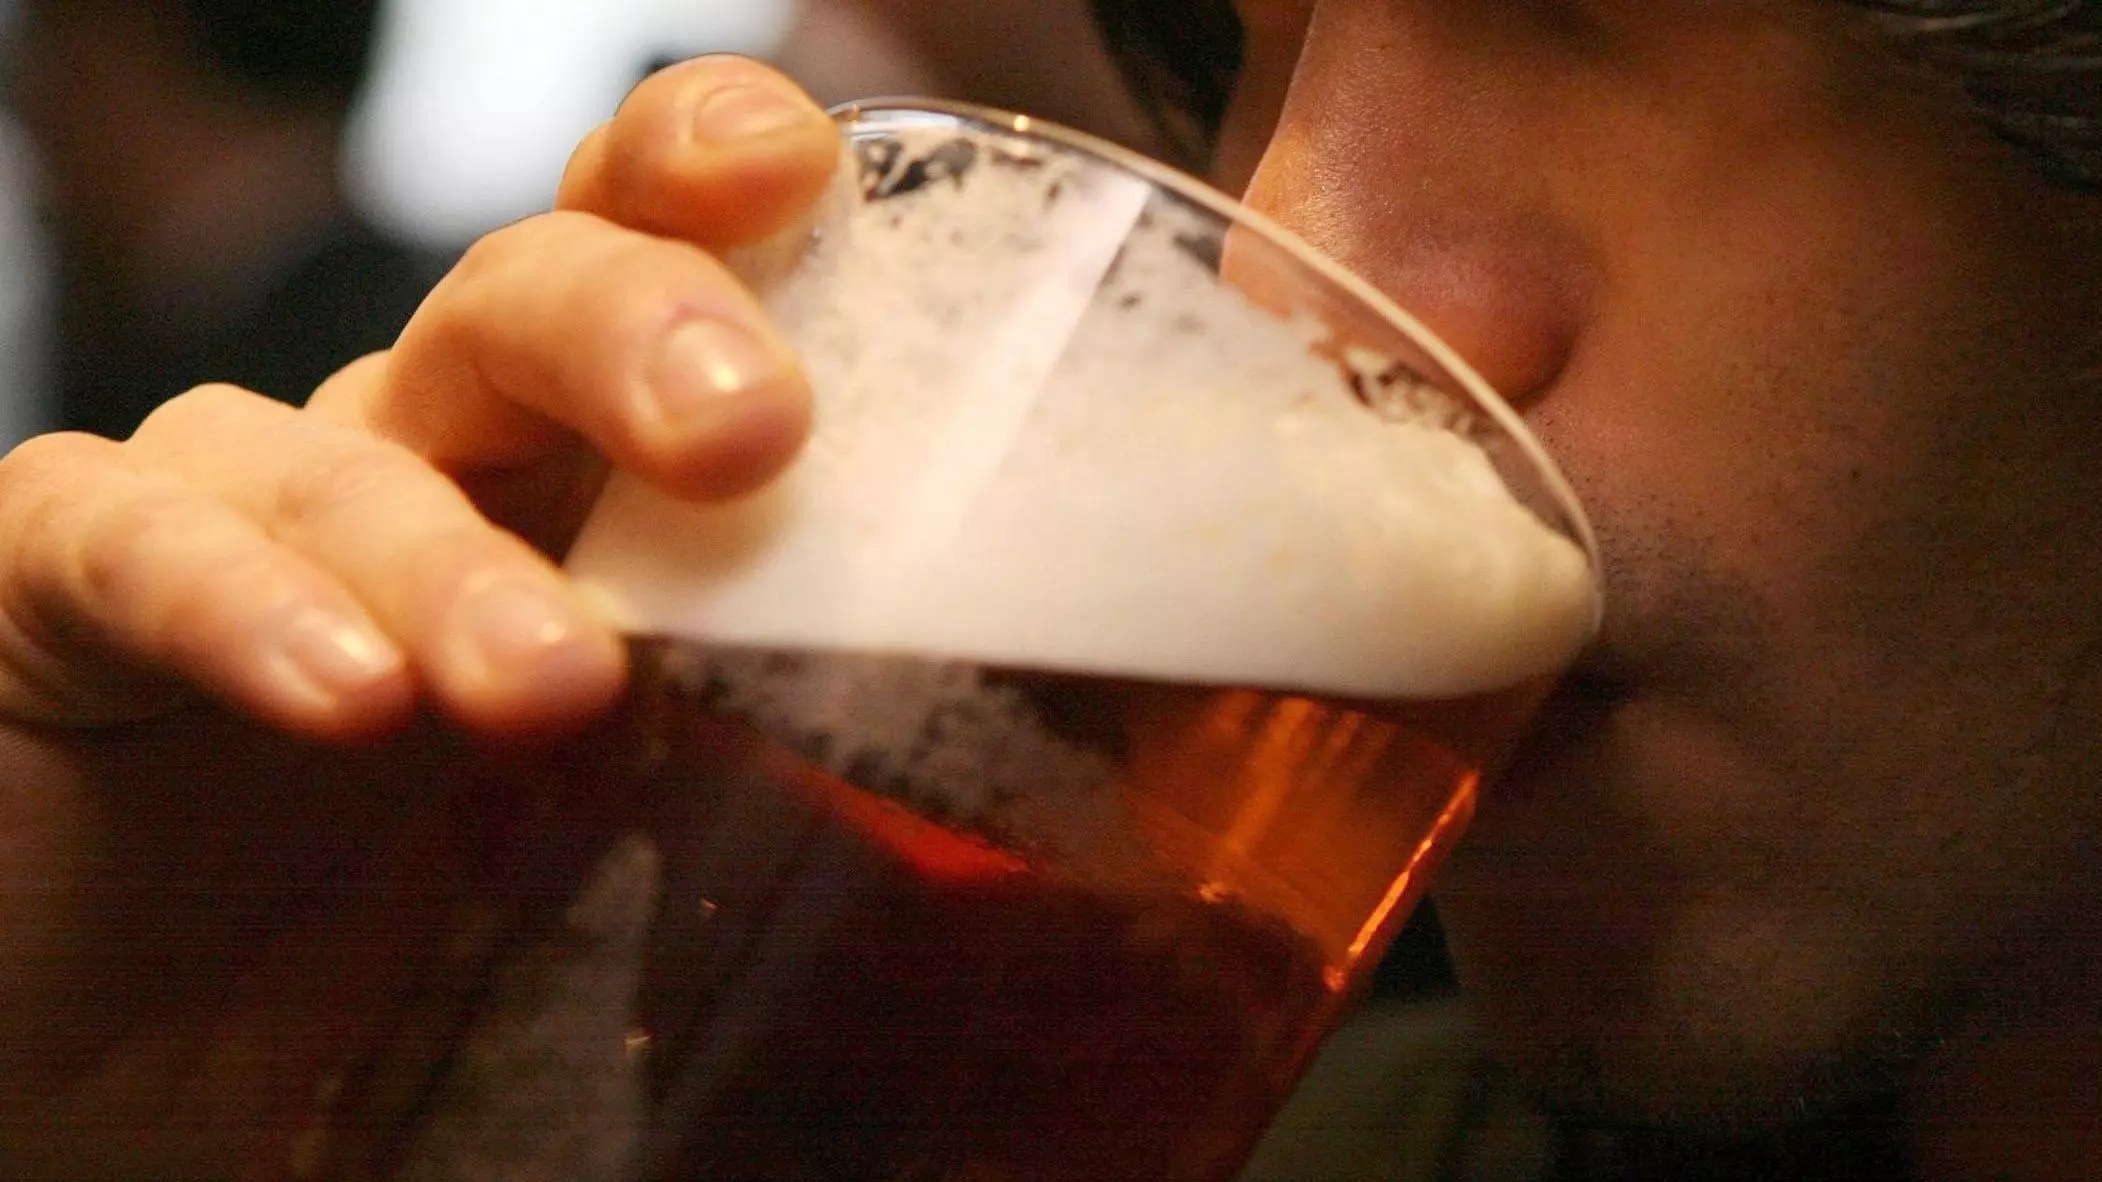 Here's When You Can Claim Alcohol On Your Work Expenses